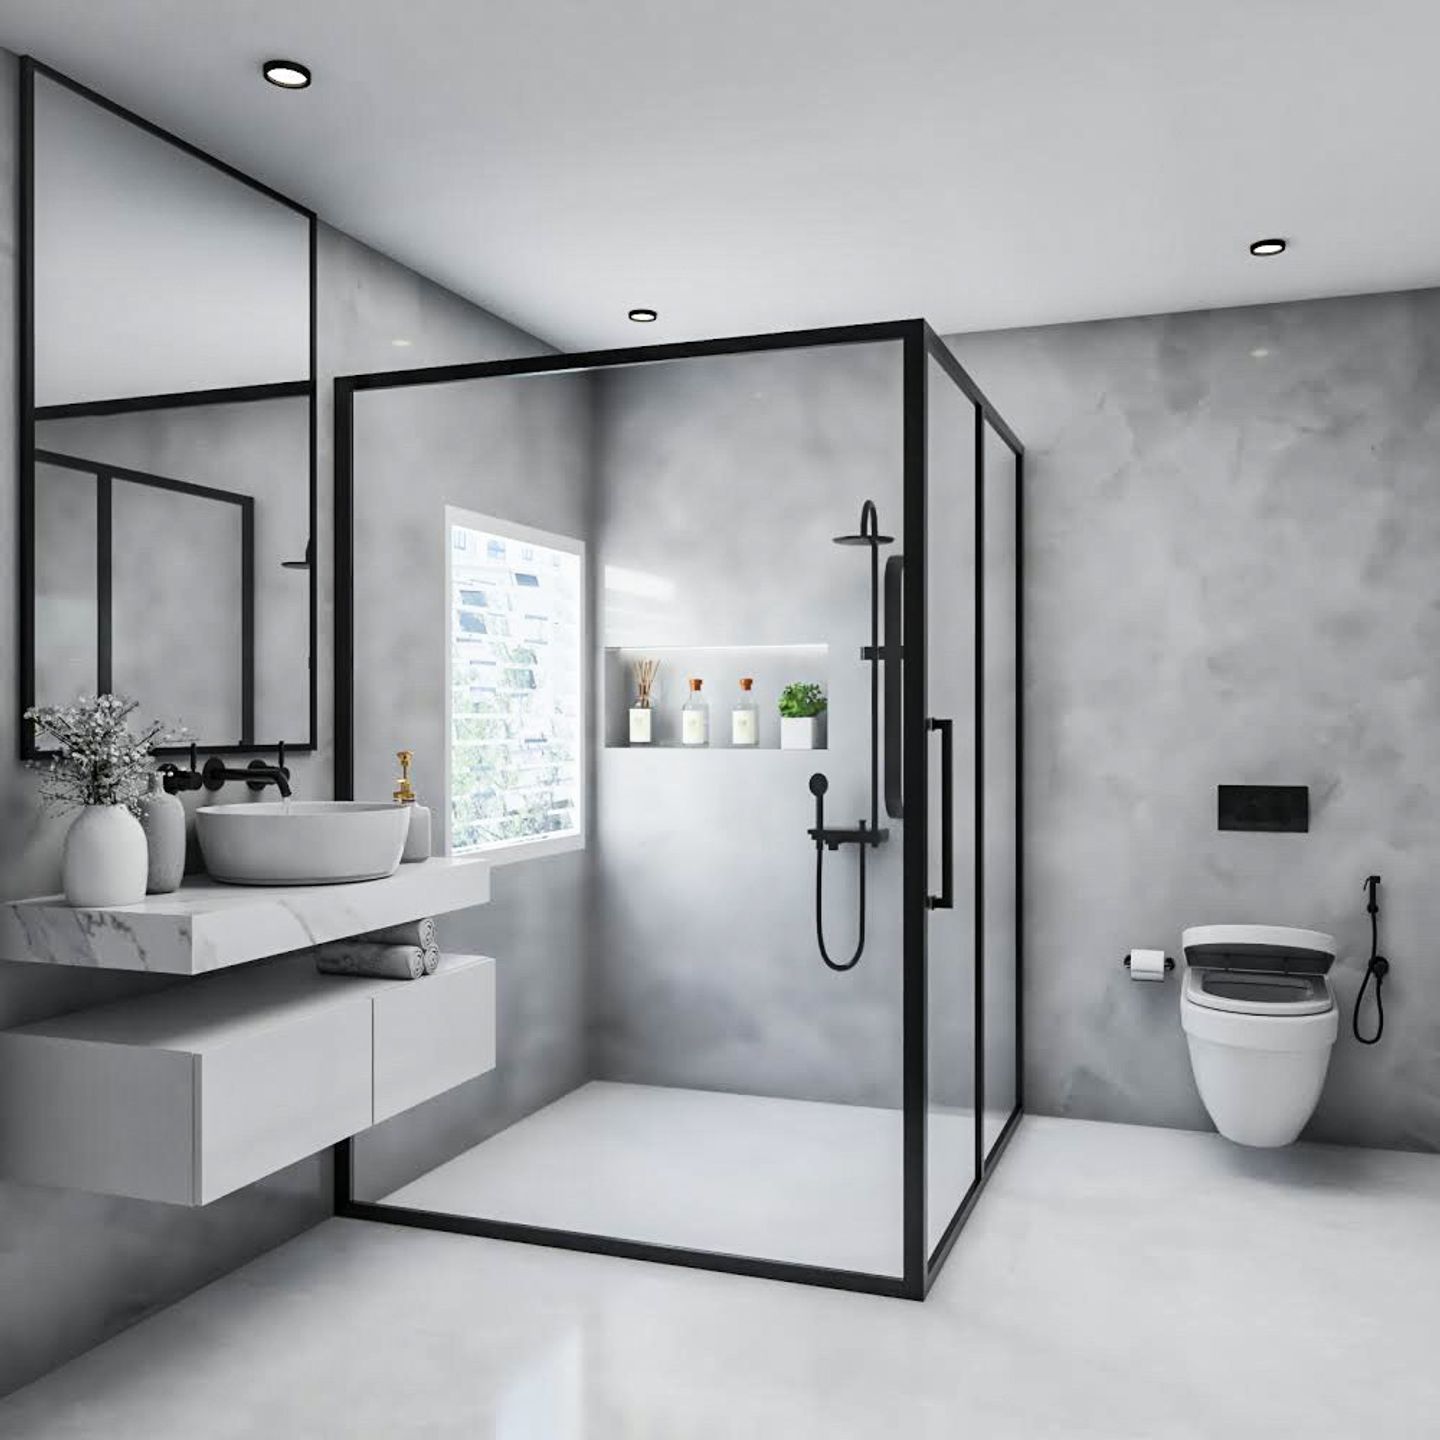 Bathroom Design With Grey Textured Wall - Livspace